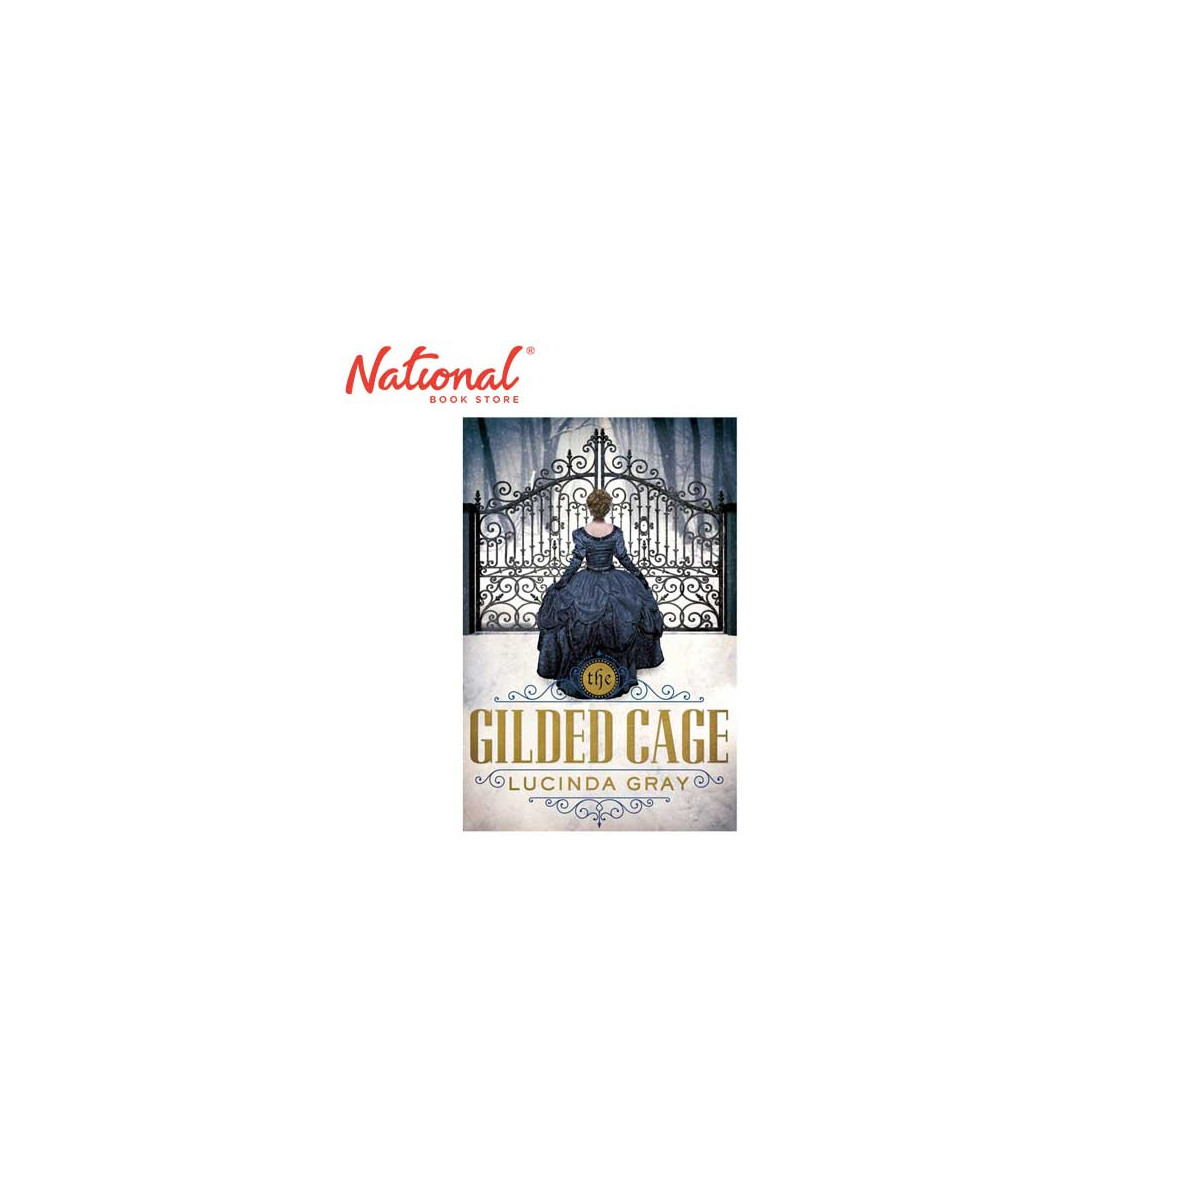 The Gilded Cage by Lucinda Gray - Trade Paperback - Teens - Thriller - Mystery - Suspense